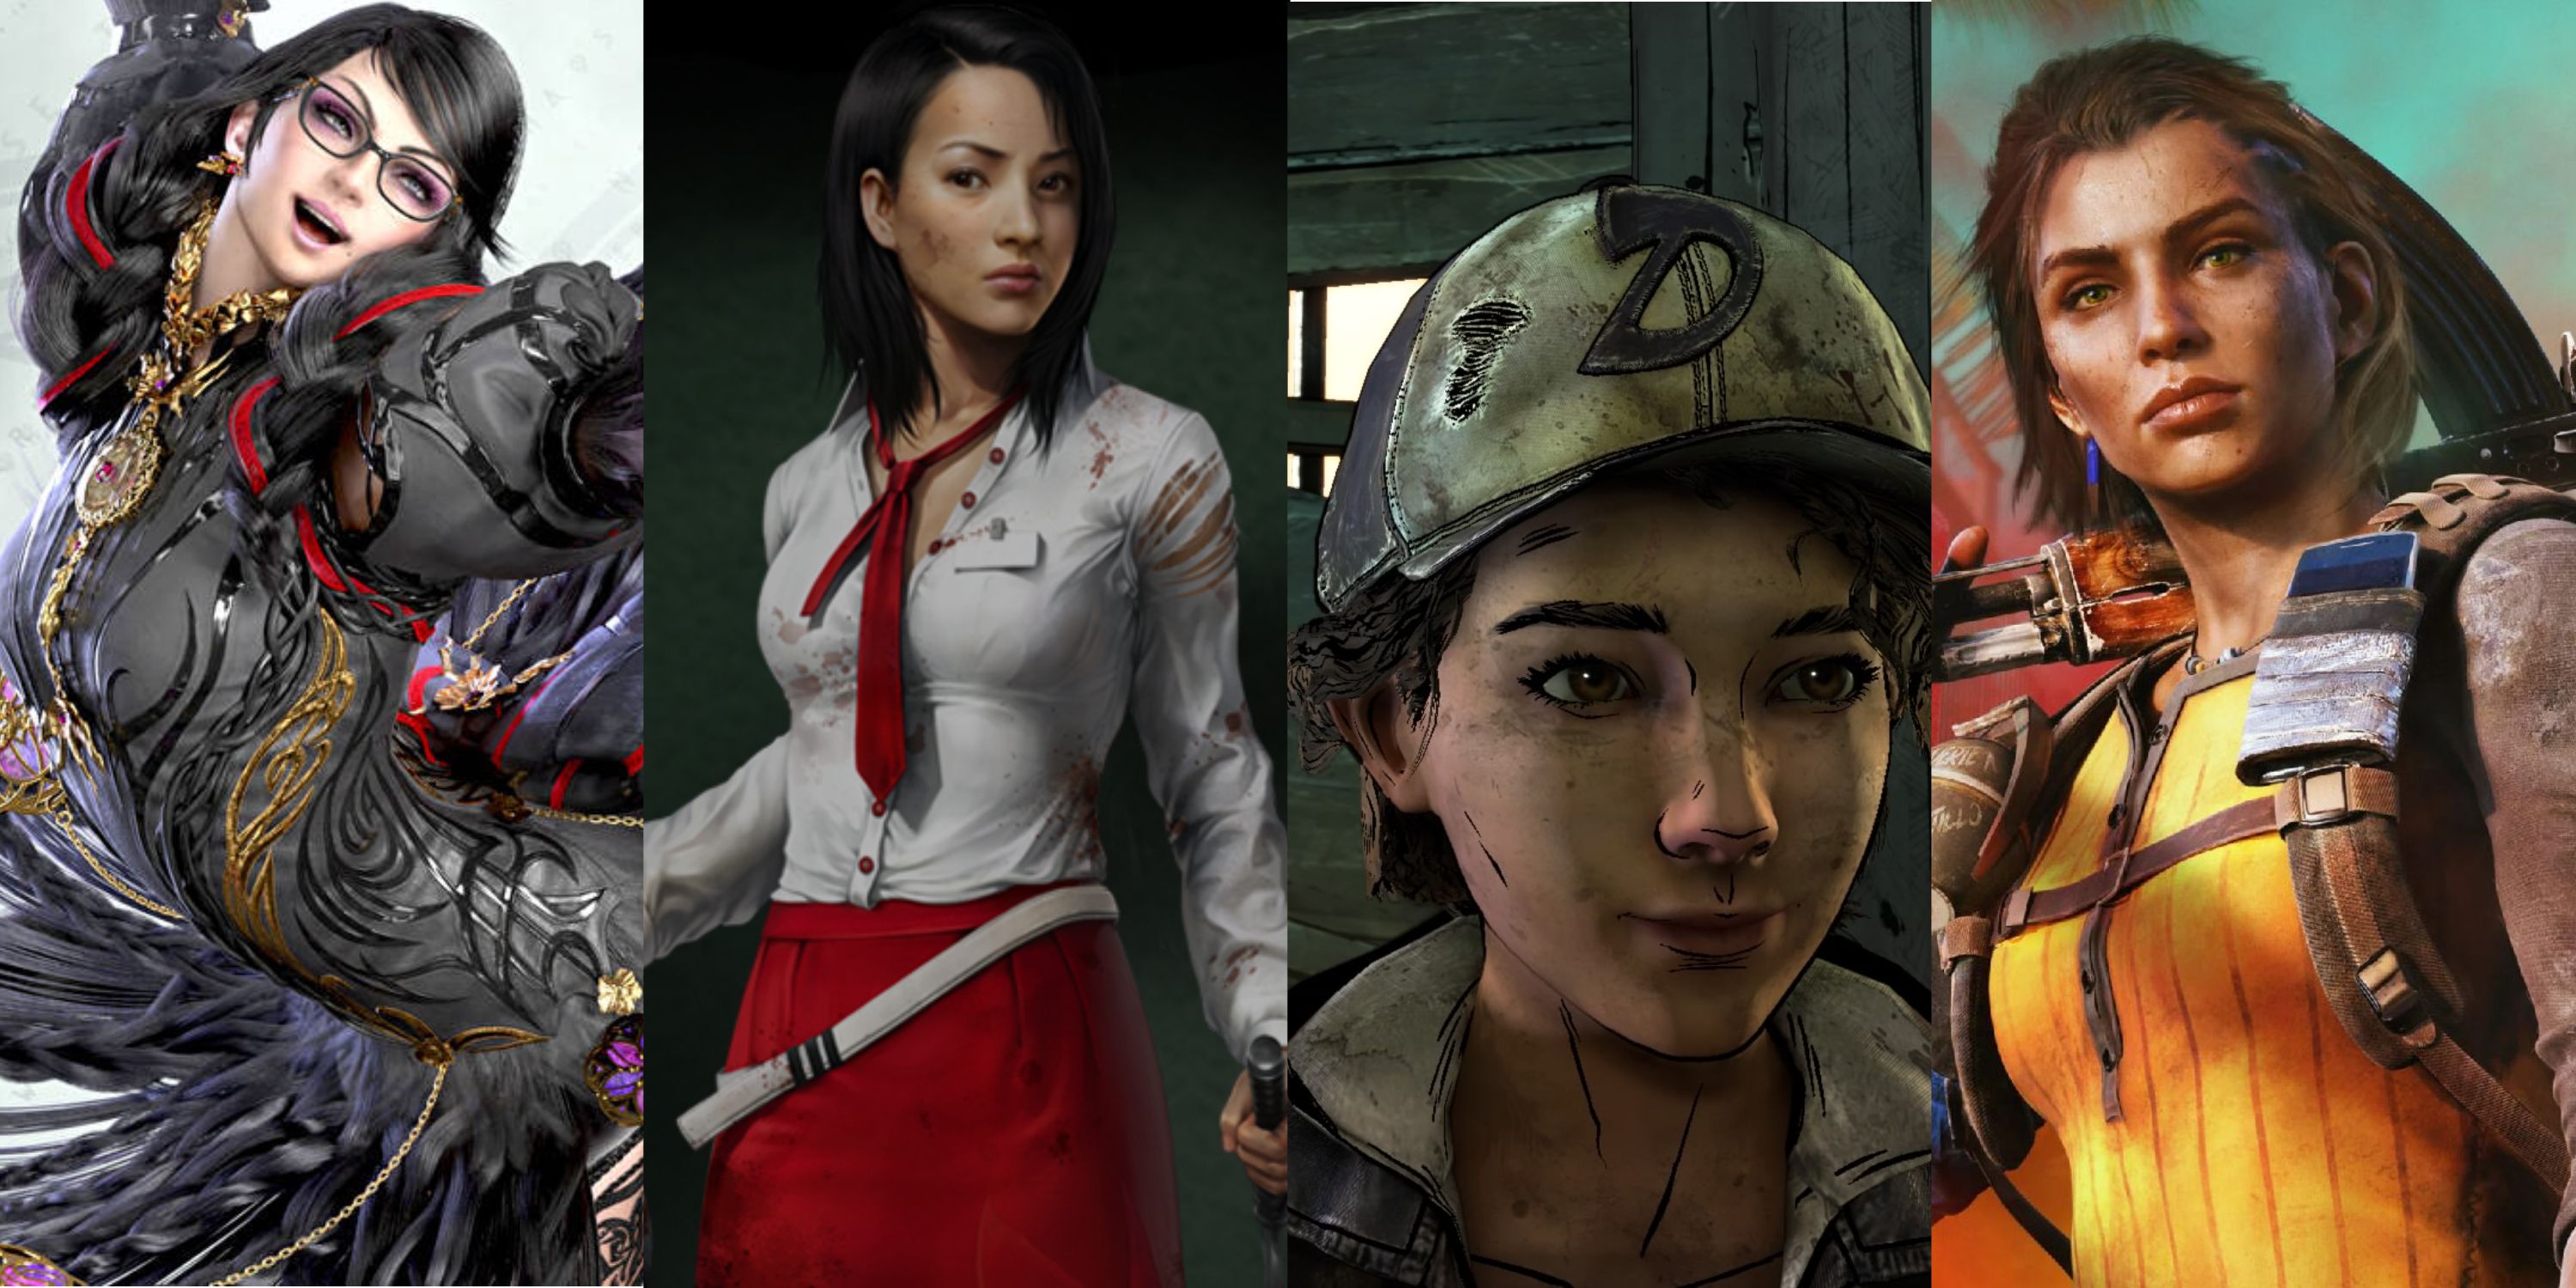 Bayonetta from Bayonetta 3, Xian Mei from Dead Island, Clemintine from Telltale Game's The Walking Dead and Dani from Far Cry 6